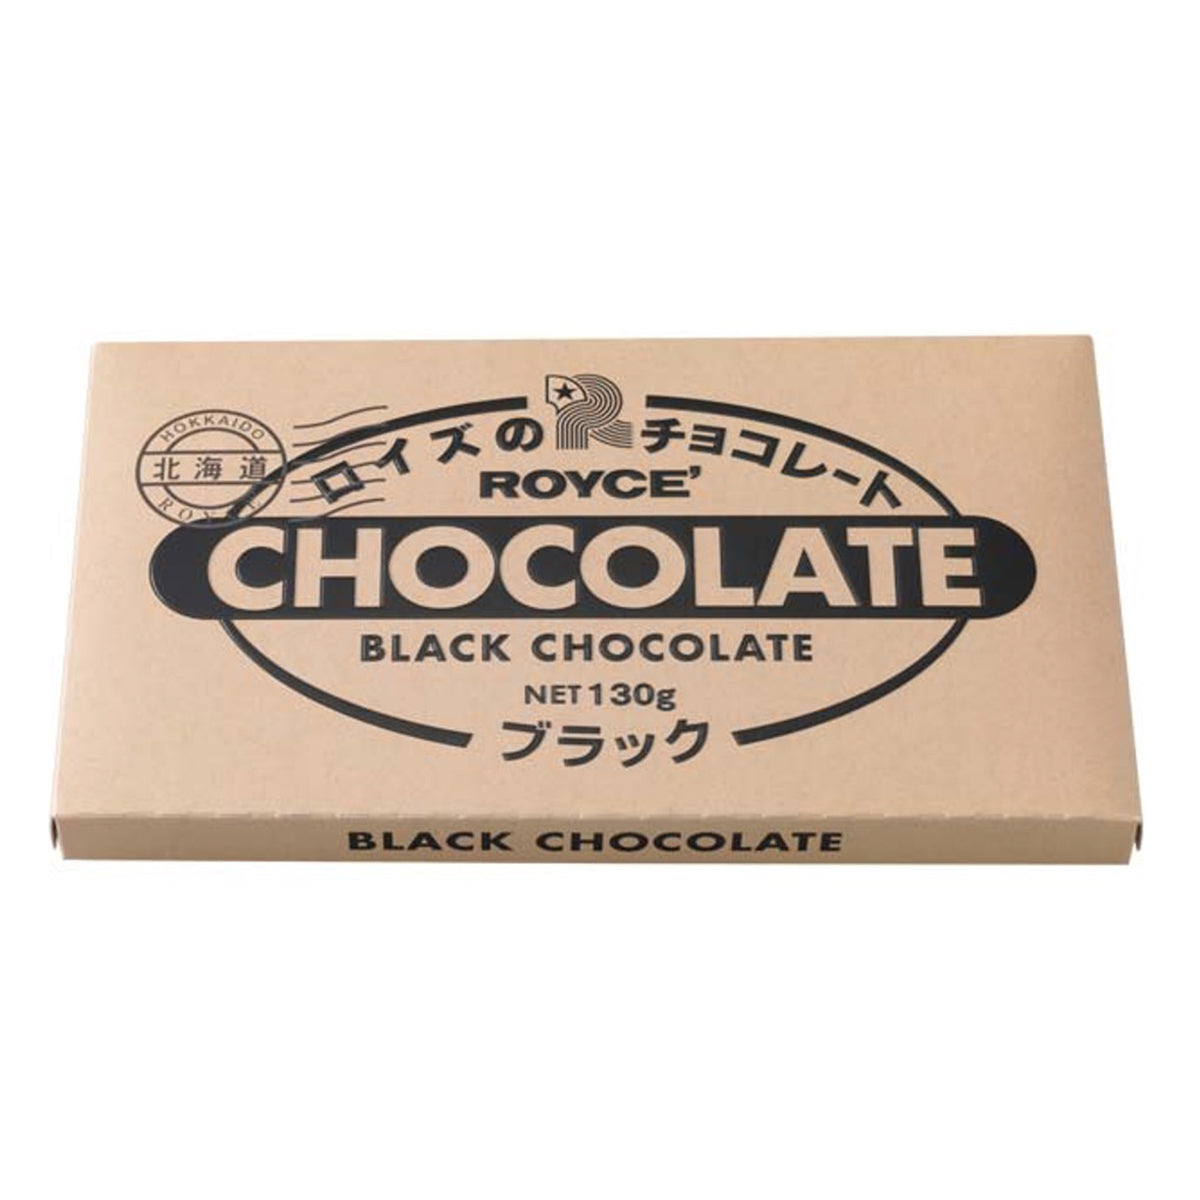 ROYCE' Chocolate - Chocolate Bar "Black" - Image shows a chocolate carton. Text in black upper middle left says Hokkaido ROYCE'. Text in black on center says ROYCE' Chocolate Black Chocolate Net 130g. Text on bottom part says Black Chocolate.